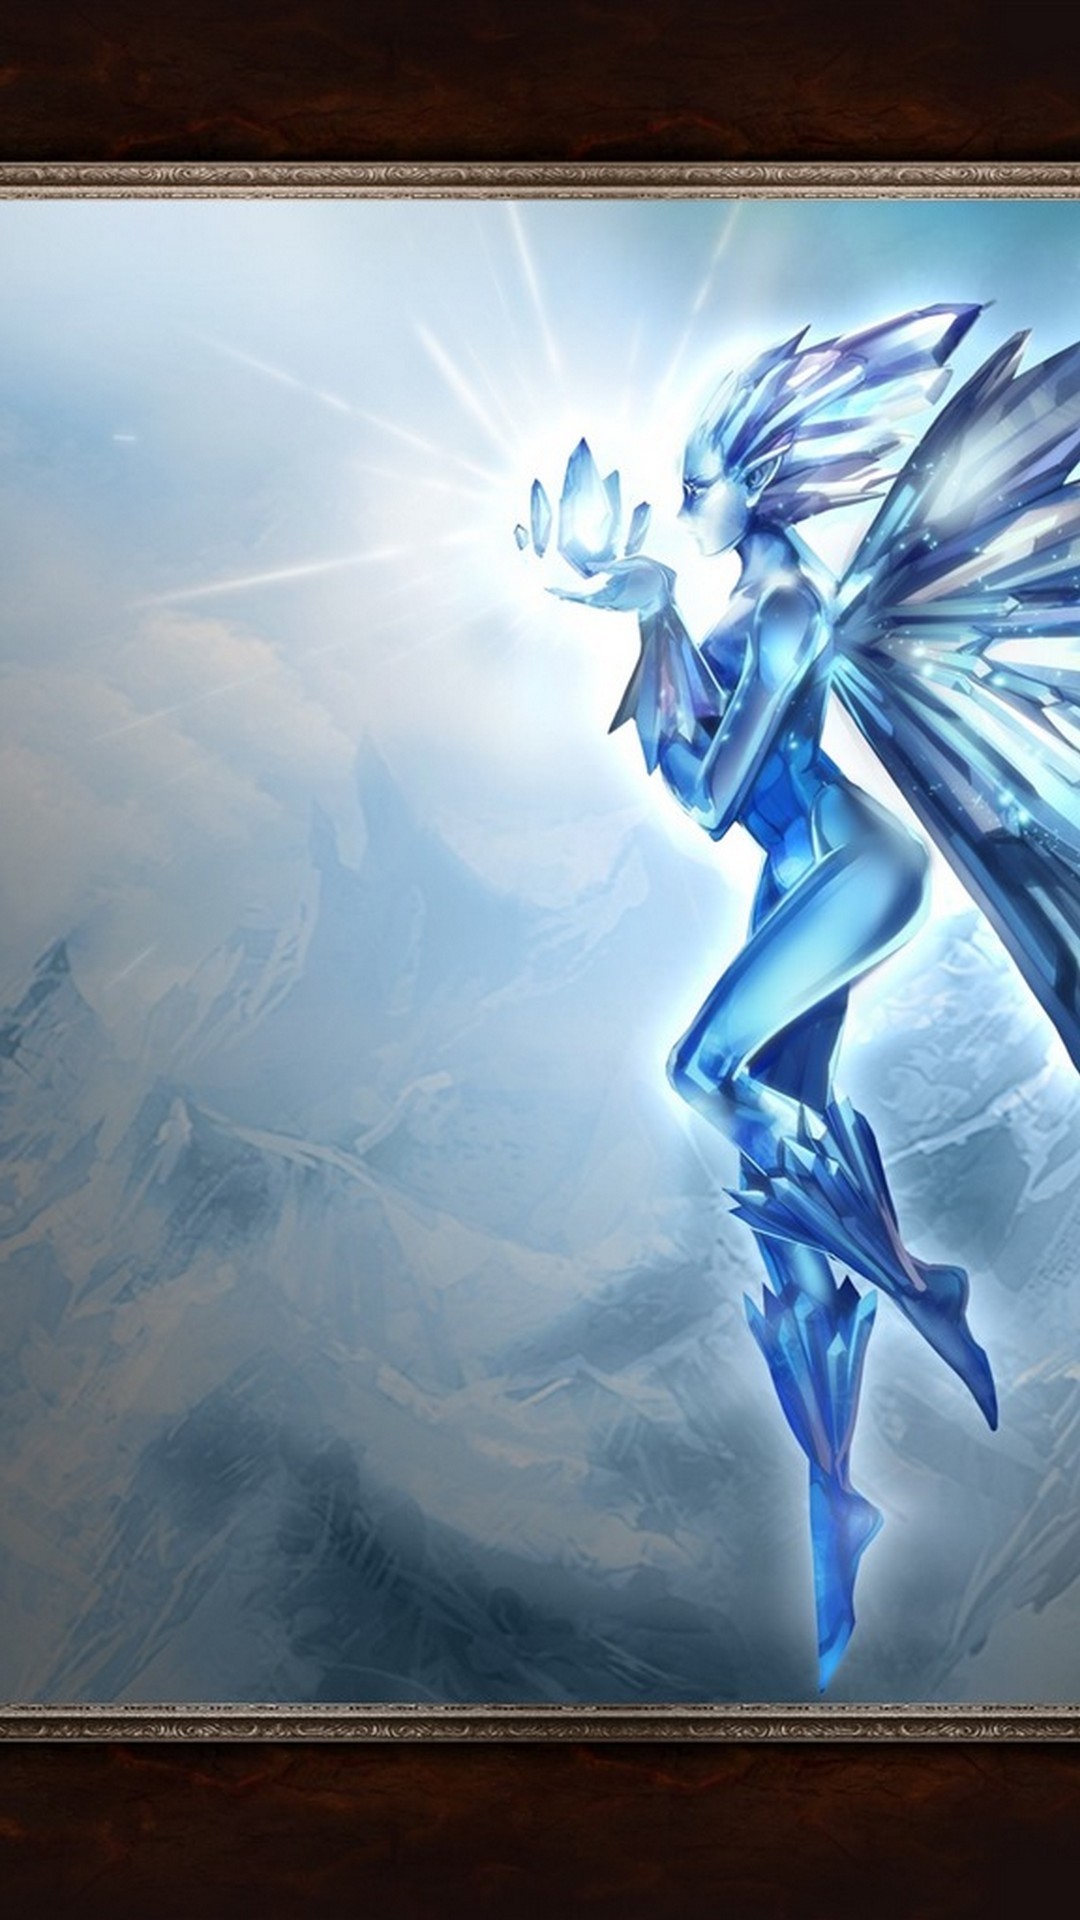 1080x1920 iPhone Wallpaper Ice Phoenix with image resolution  pixel. You can  make this wallpaper for